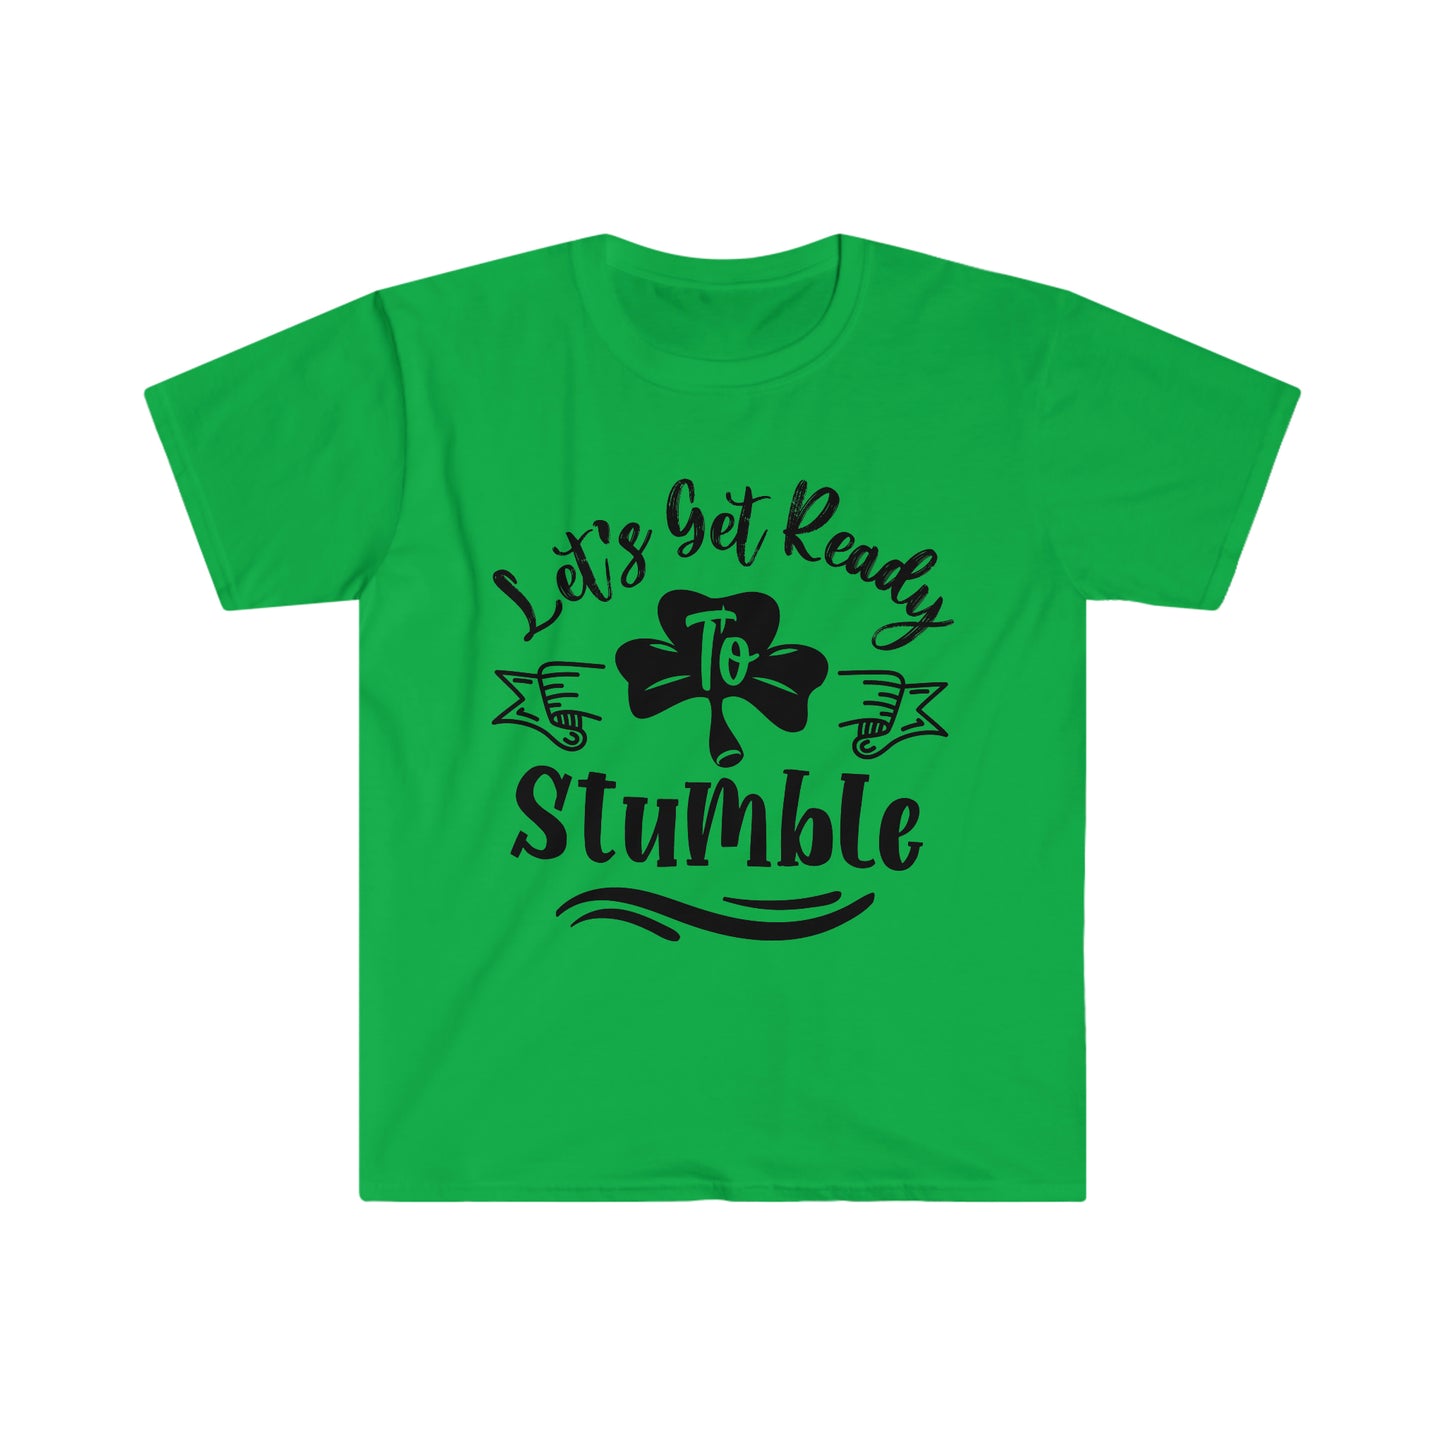 'Let's Get Ready To Stumble' Essential Comfort Tee